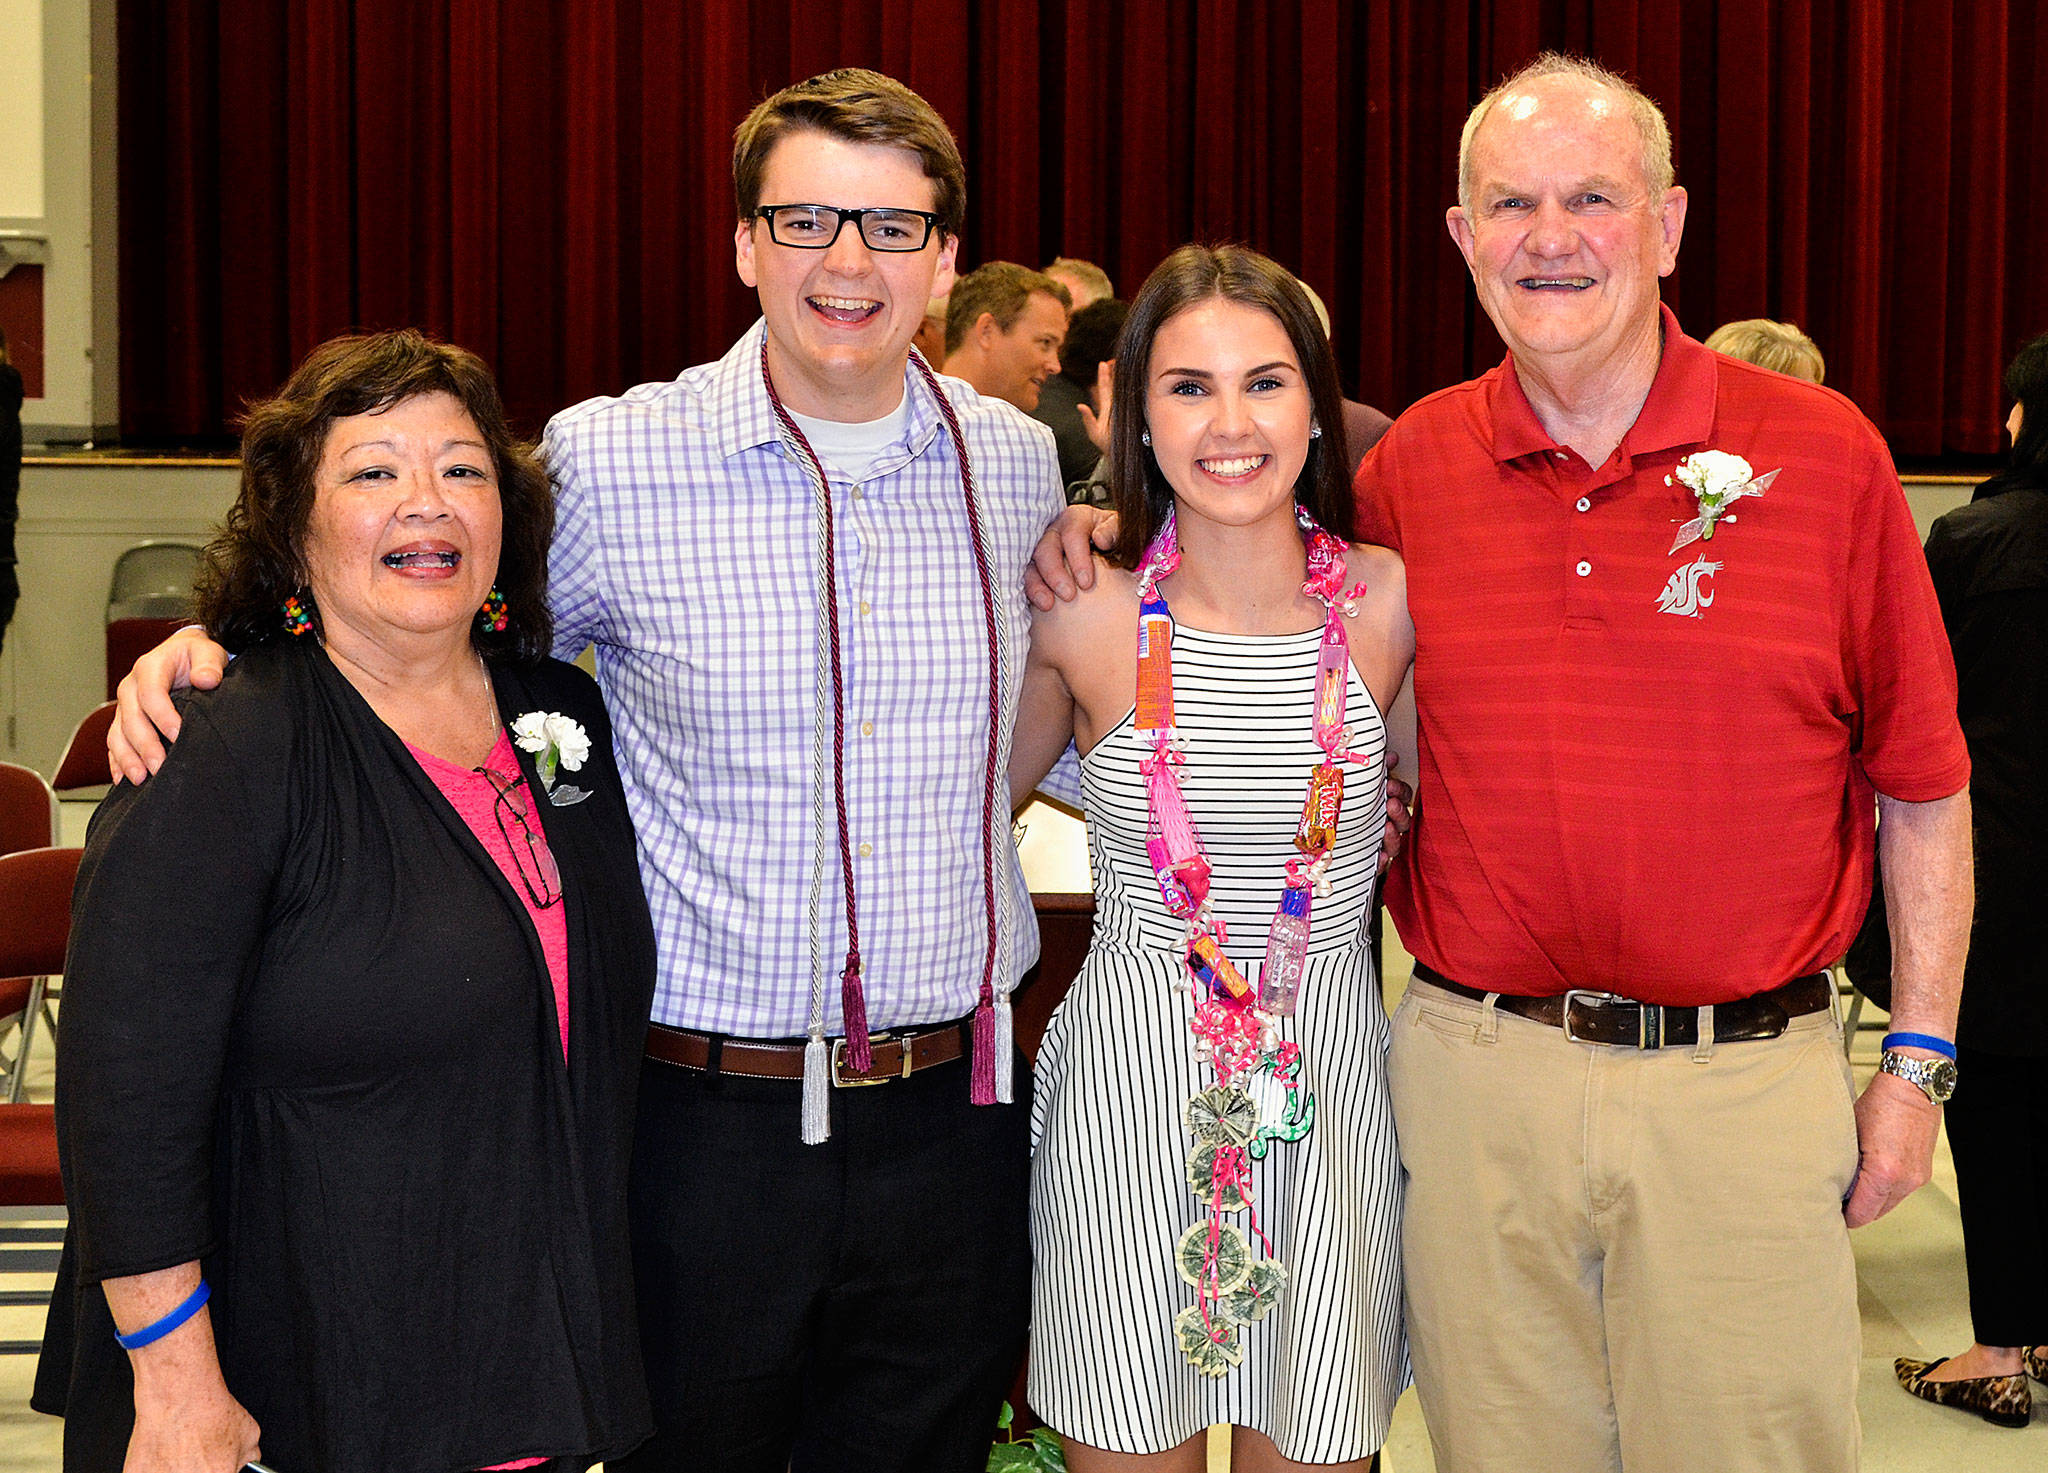 Don and Jan Jensen (far right and far left) with Sara Thomas and Zack Demars, both 2017 Cascade High School graduates and winners of scholarships awarded in honor of the Jensens’ son Brett, who died in 2002.